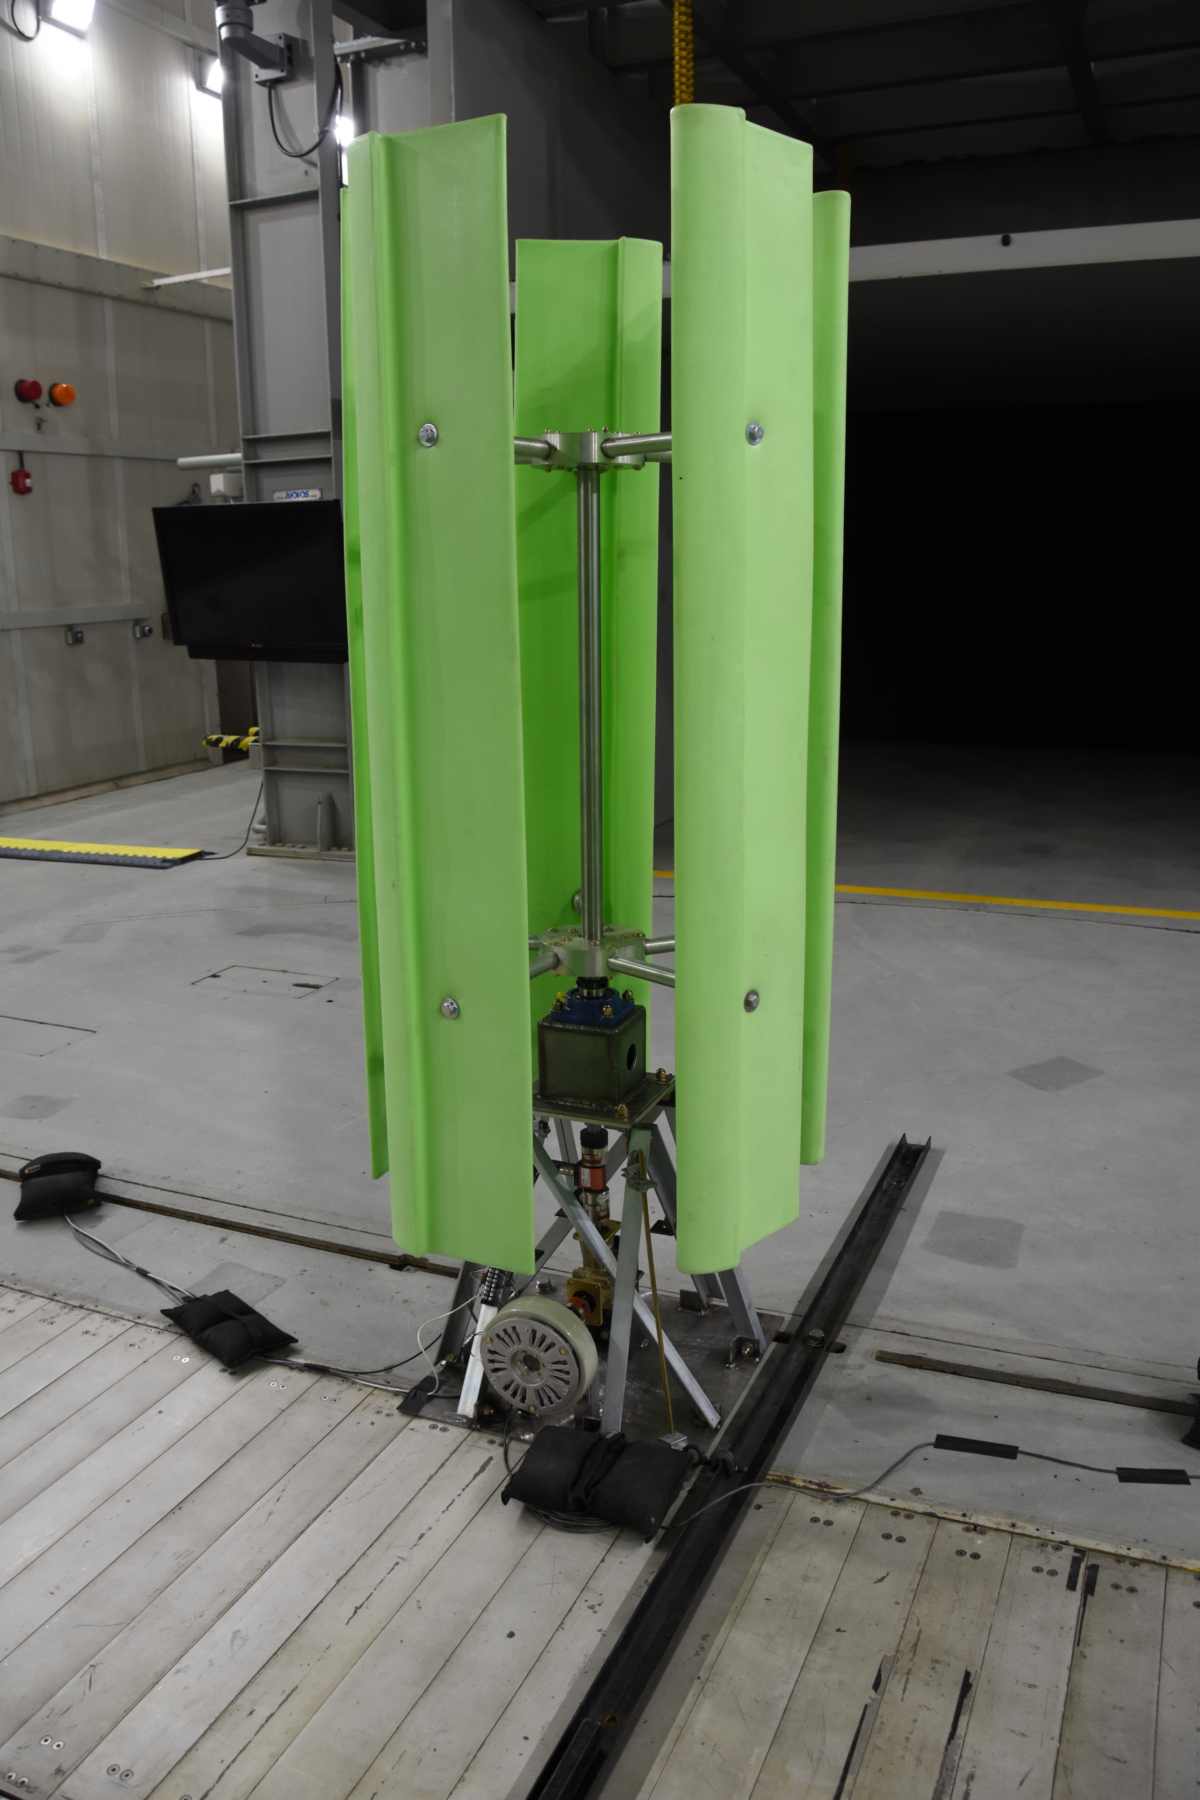 Another vertical axis wind turbine close up in wind tunnel